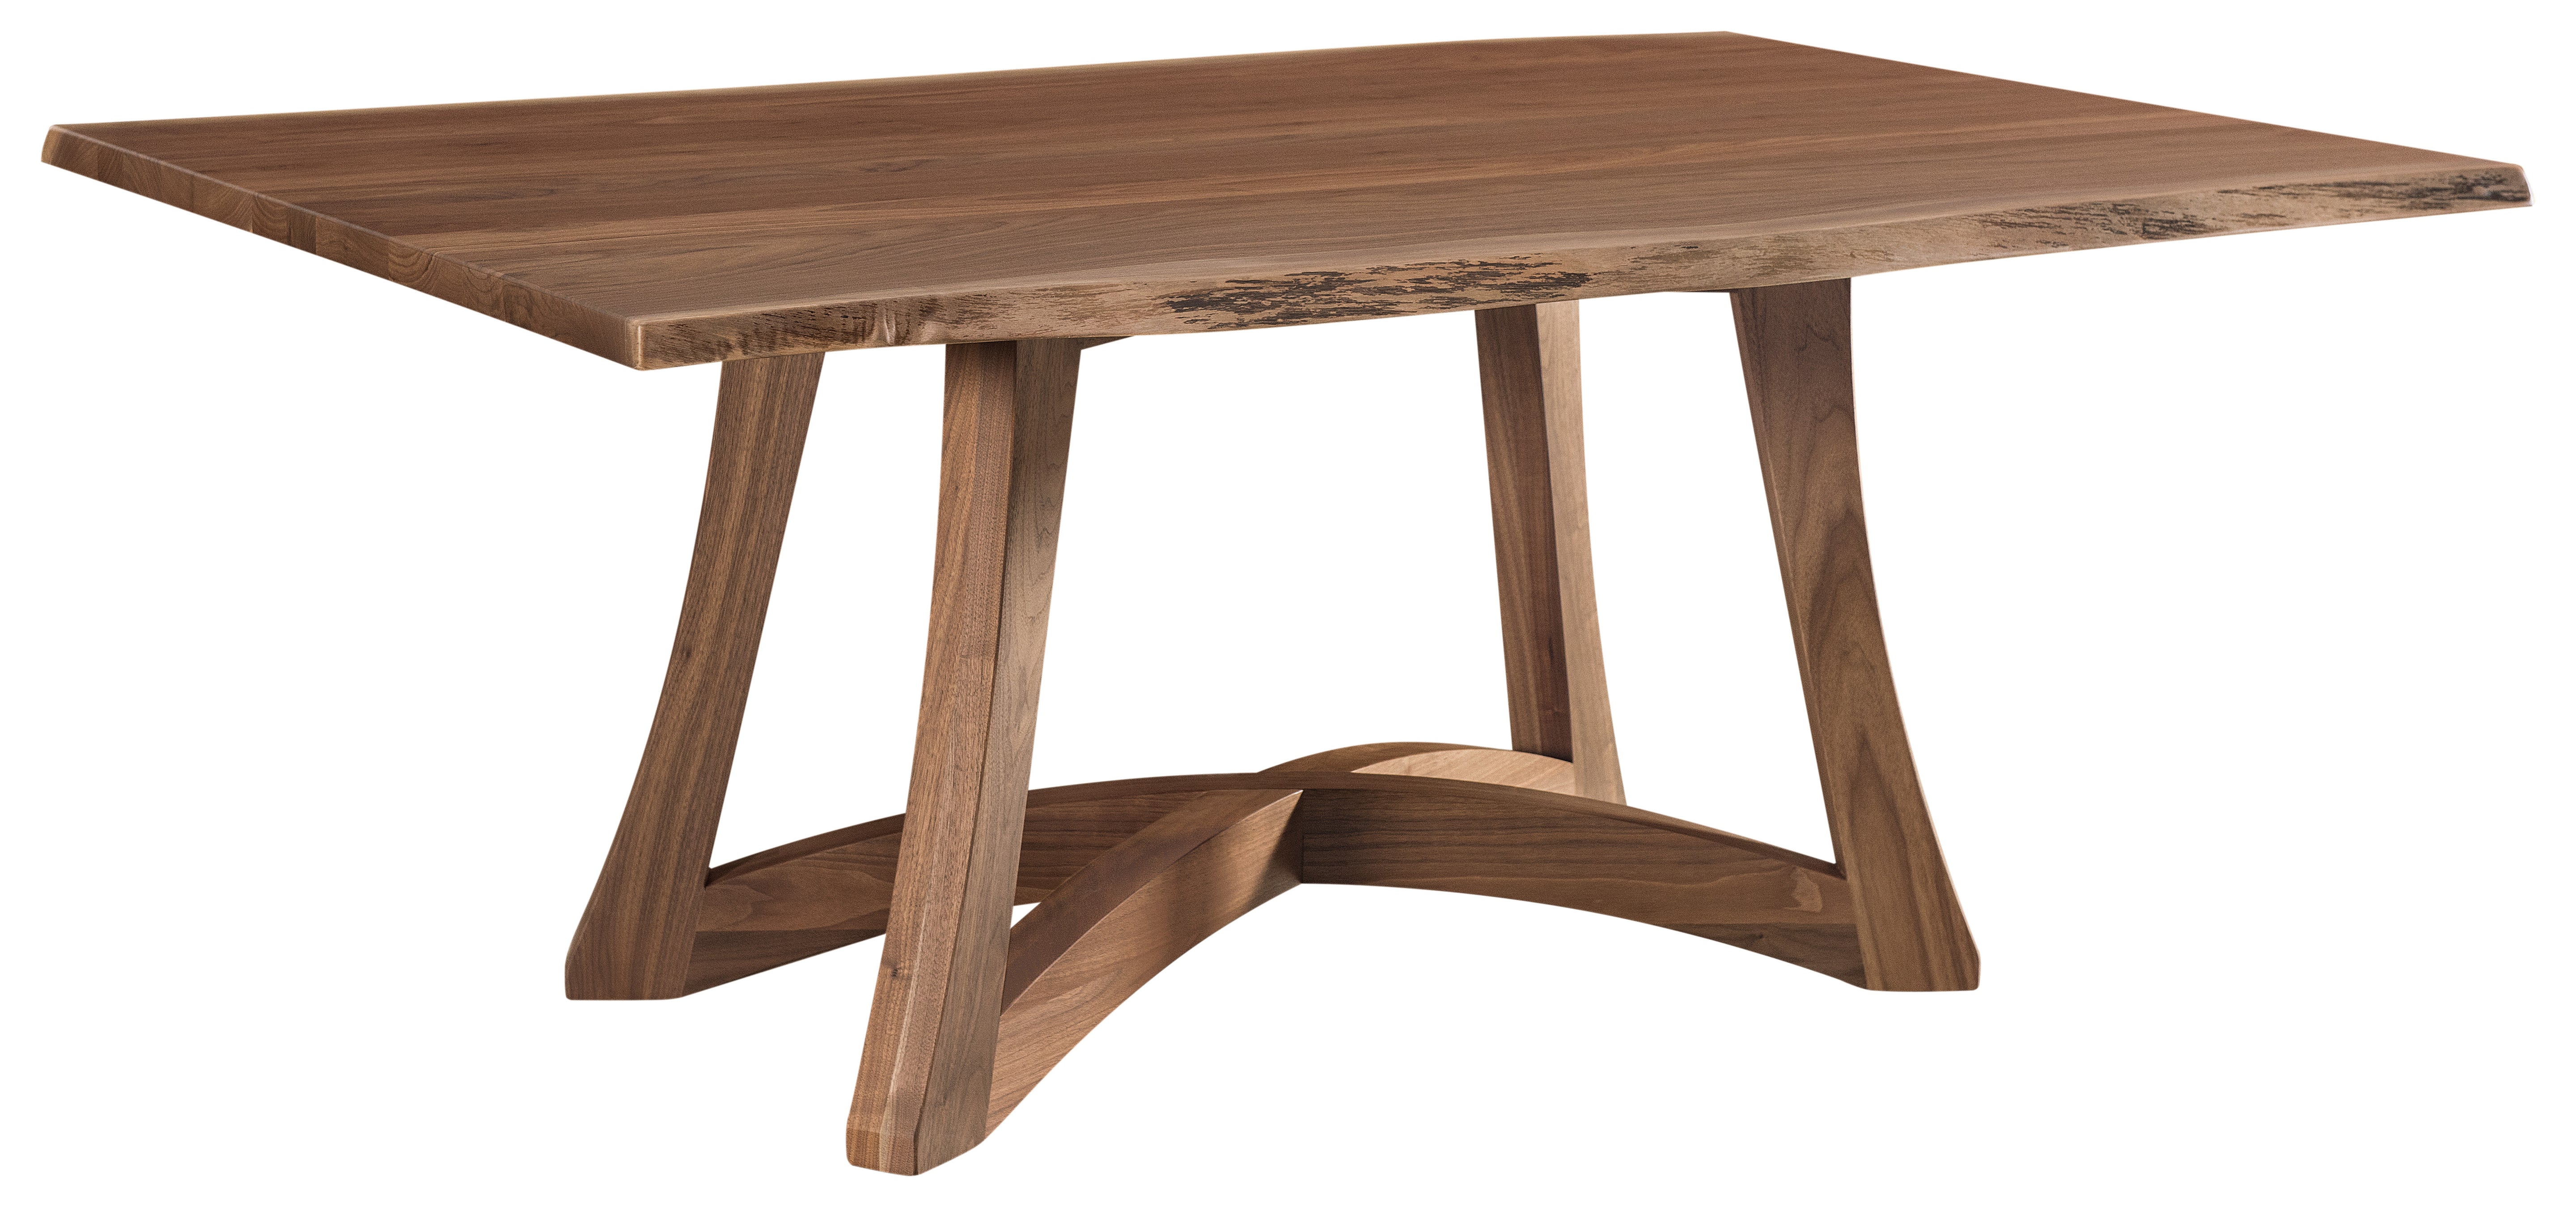 Tifton Live Edge Dining Table shown in Walnut wood with a Natural finish.